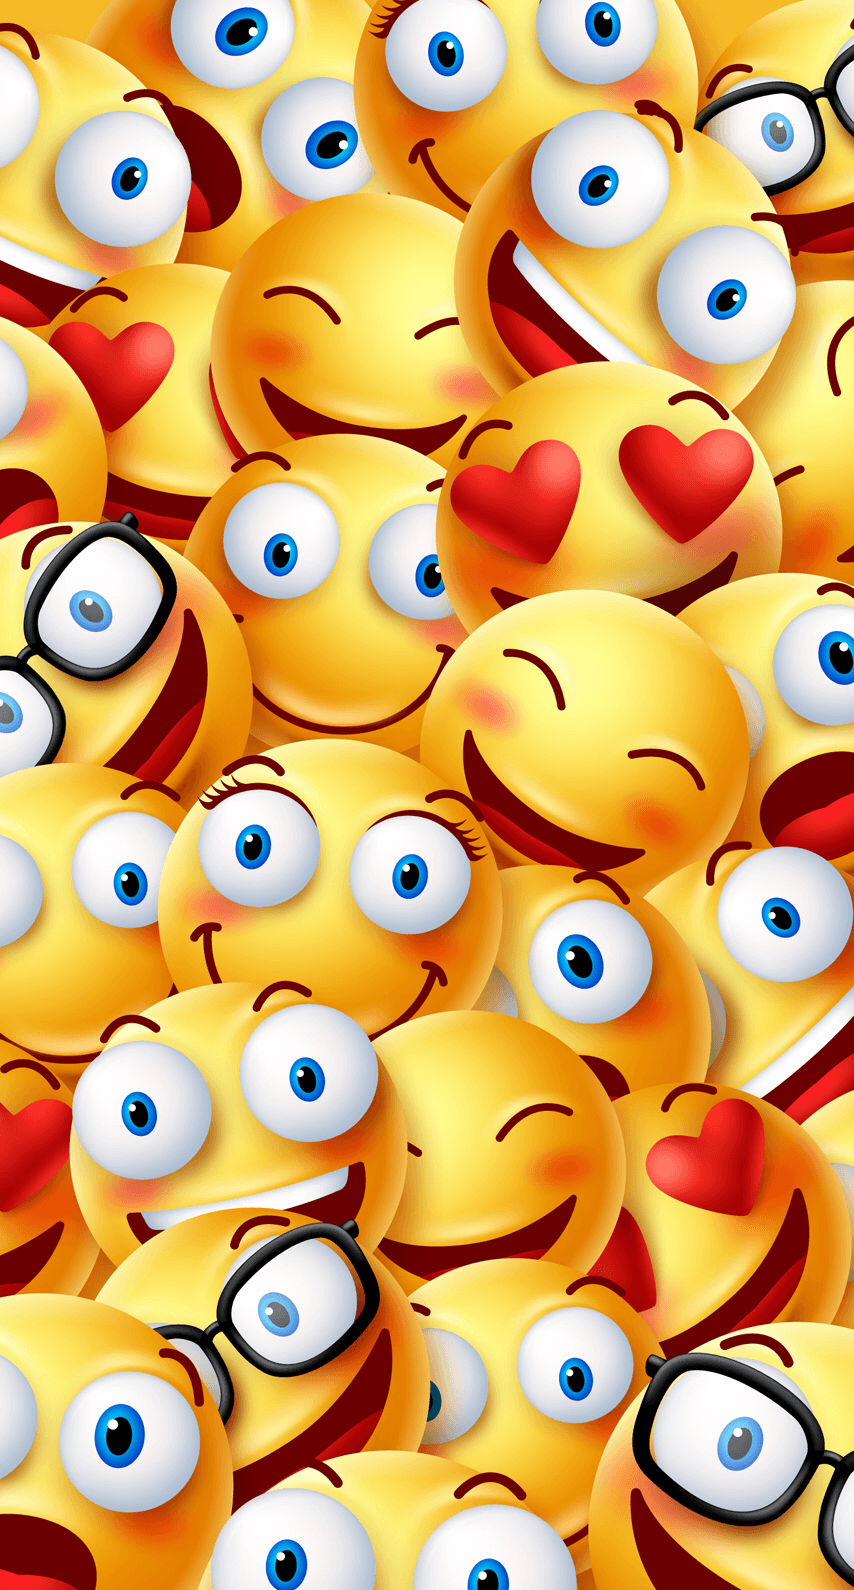 A close up of many yellow smiley faces - Emoji